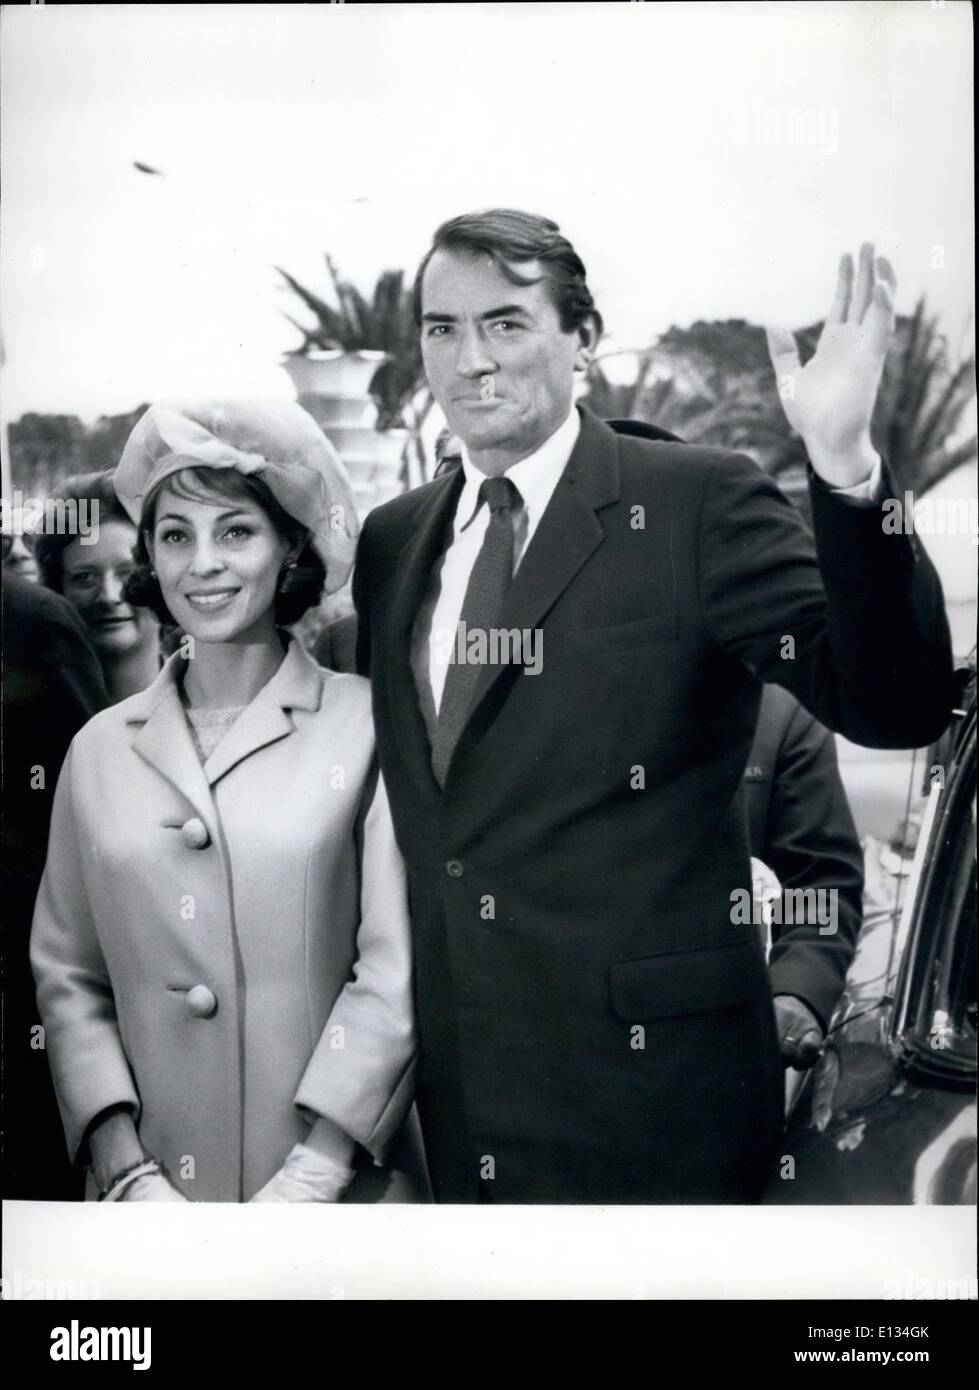 Feb. 28, 2012 - Gregory Peck Appears For The First Time At The Cannes Film Festival: Gregory Peck, 48, arrived for the first time in his life in Cannes for the Film Festival. He will assist at the presentation of his latest picture: ''To Kill A Mockingbird'' for which he already received the 1963 Oscar as the best actor. Gregory Peck arrived with his wife Veronique. OPS/ Gregory Peck and his wife Veronique arrive at the Carlton, Hotel. Stock Photo